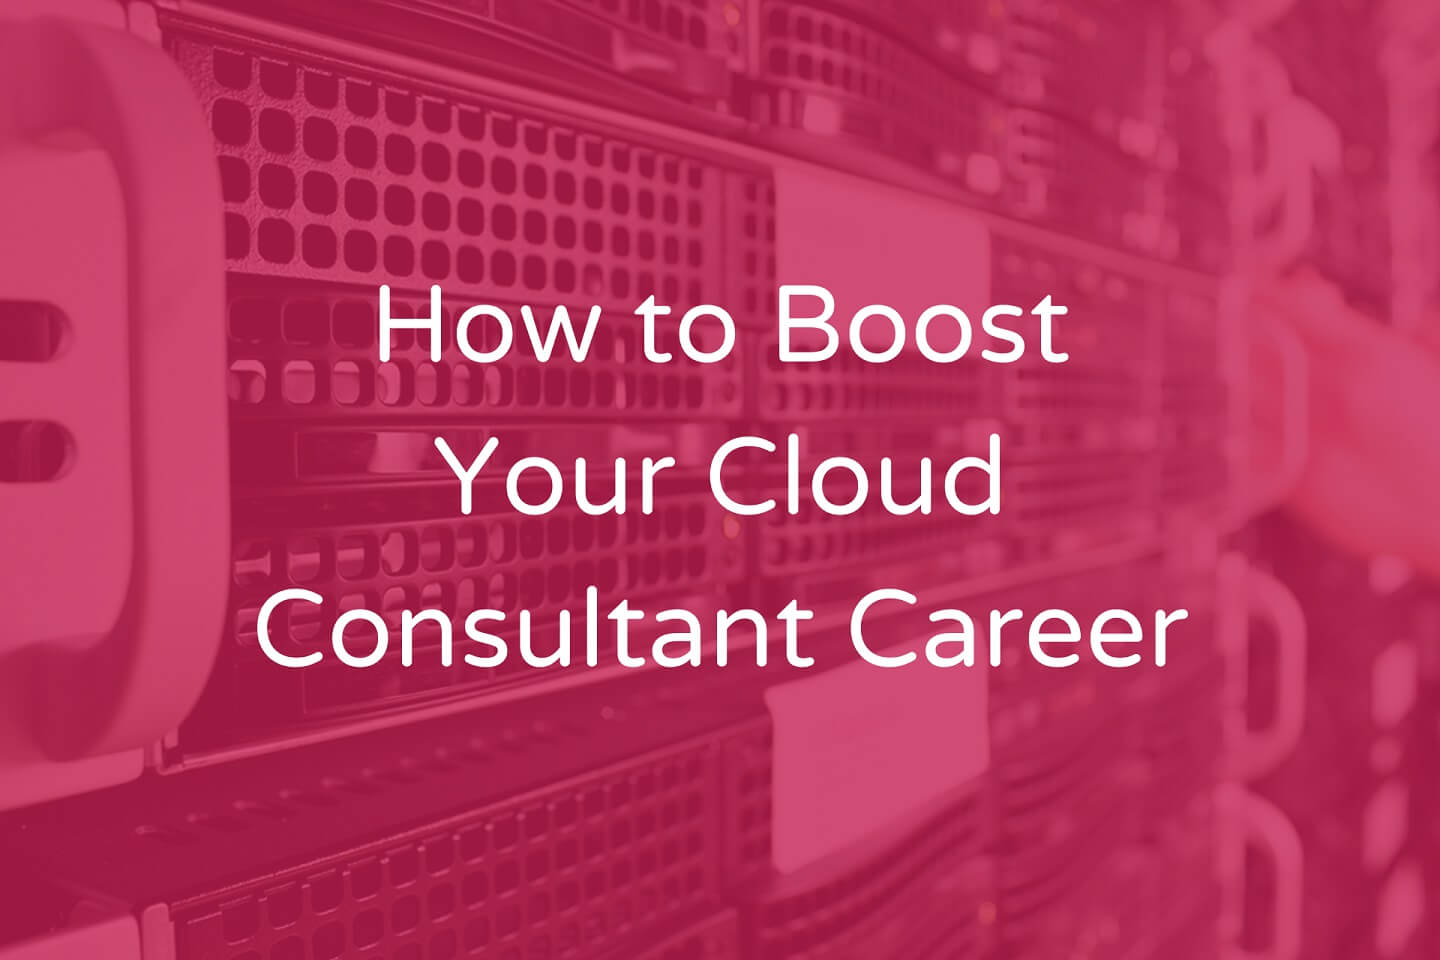 How to Boost Your Cloud Consultant Career